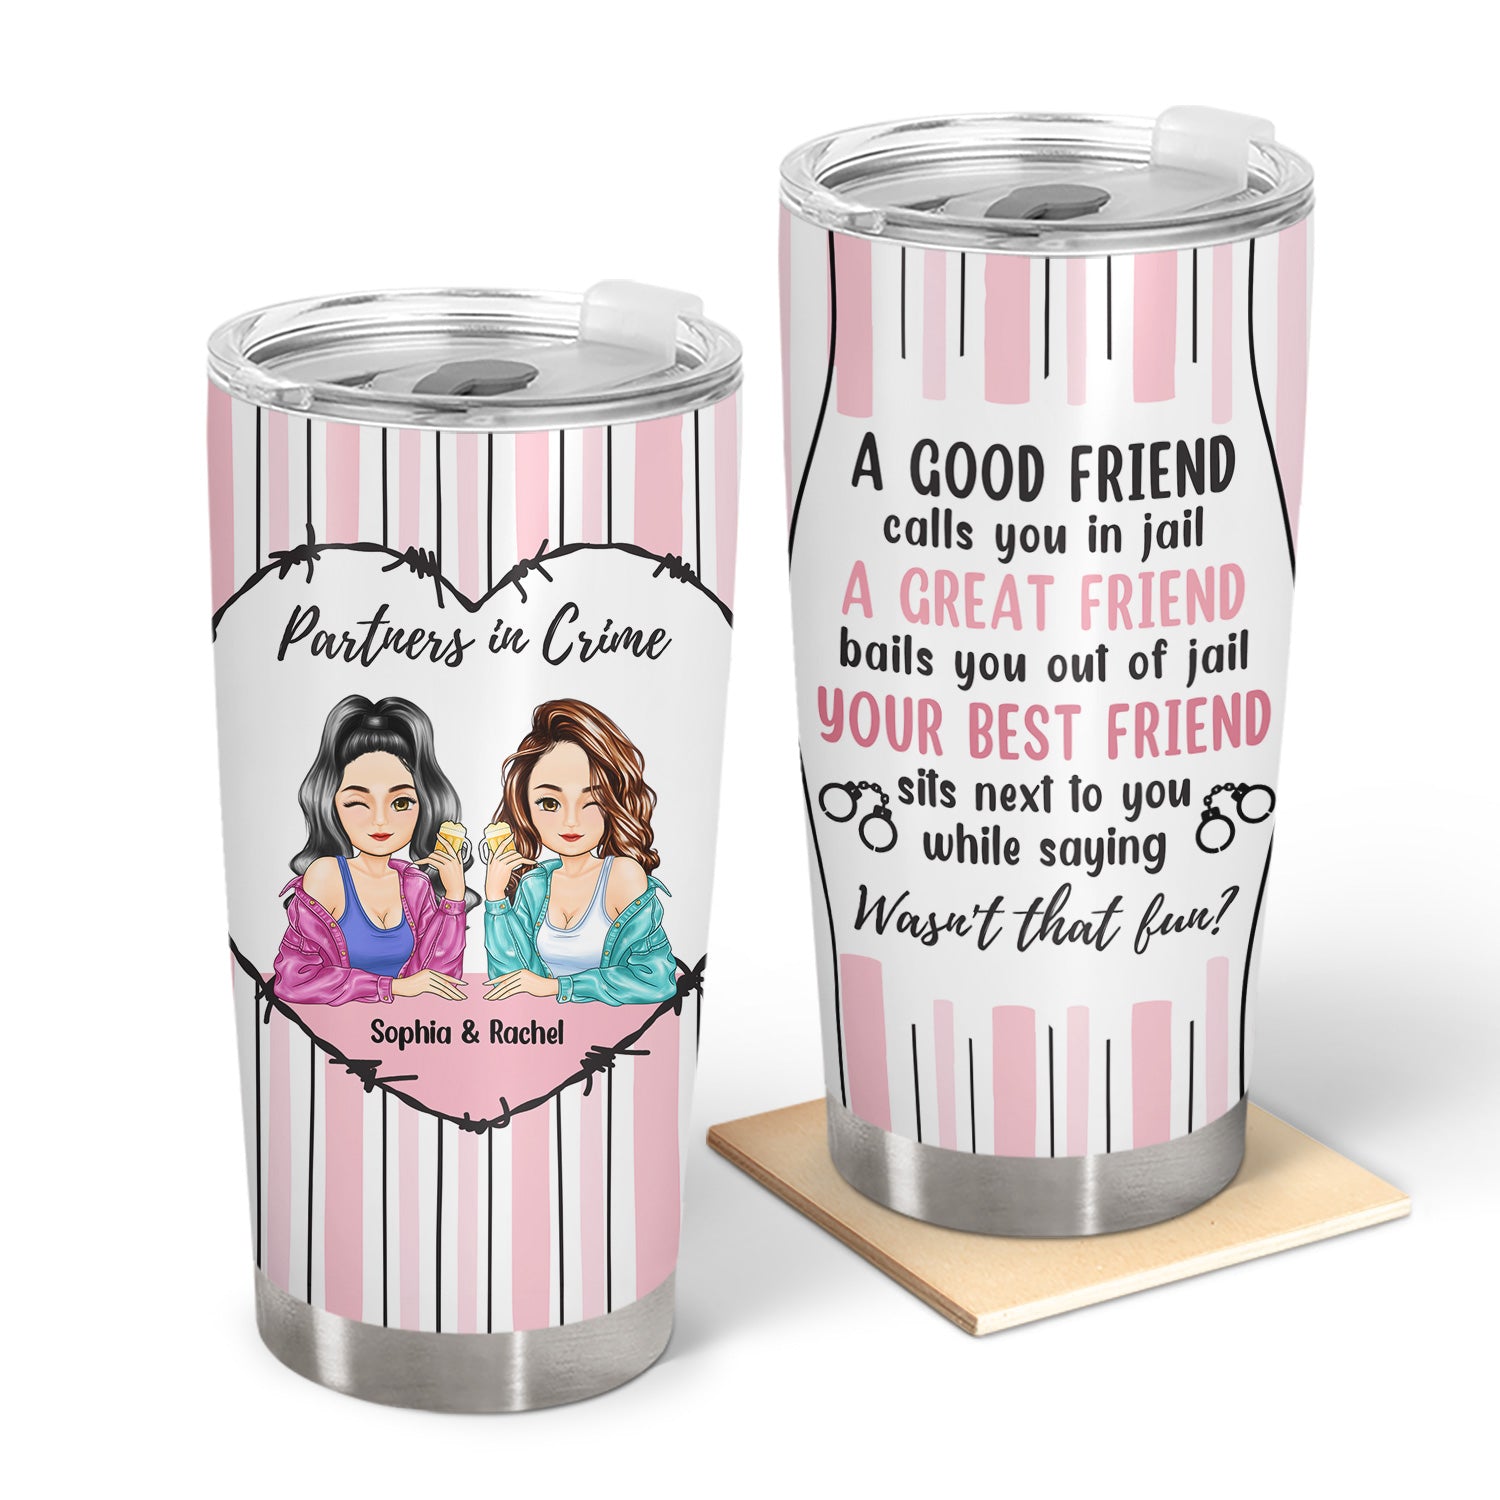 Wasn't That Fun - Gift For Bestie - Personalized Tumbler